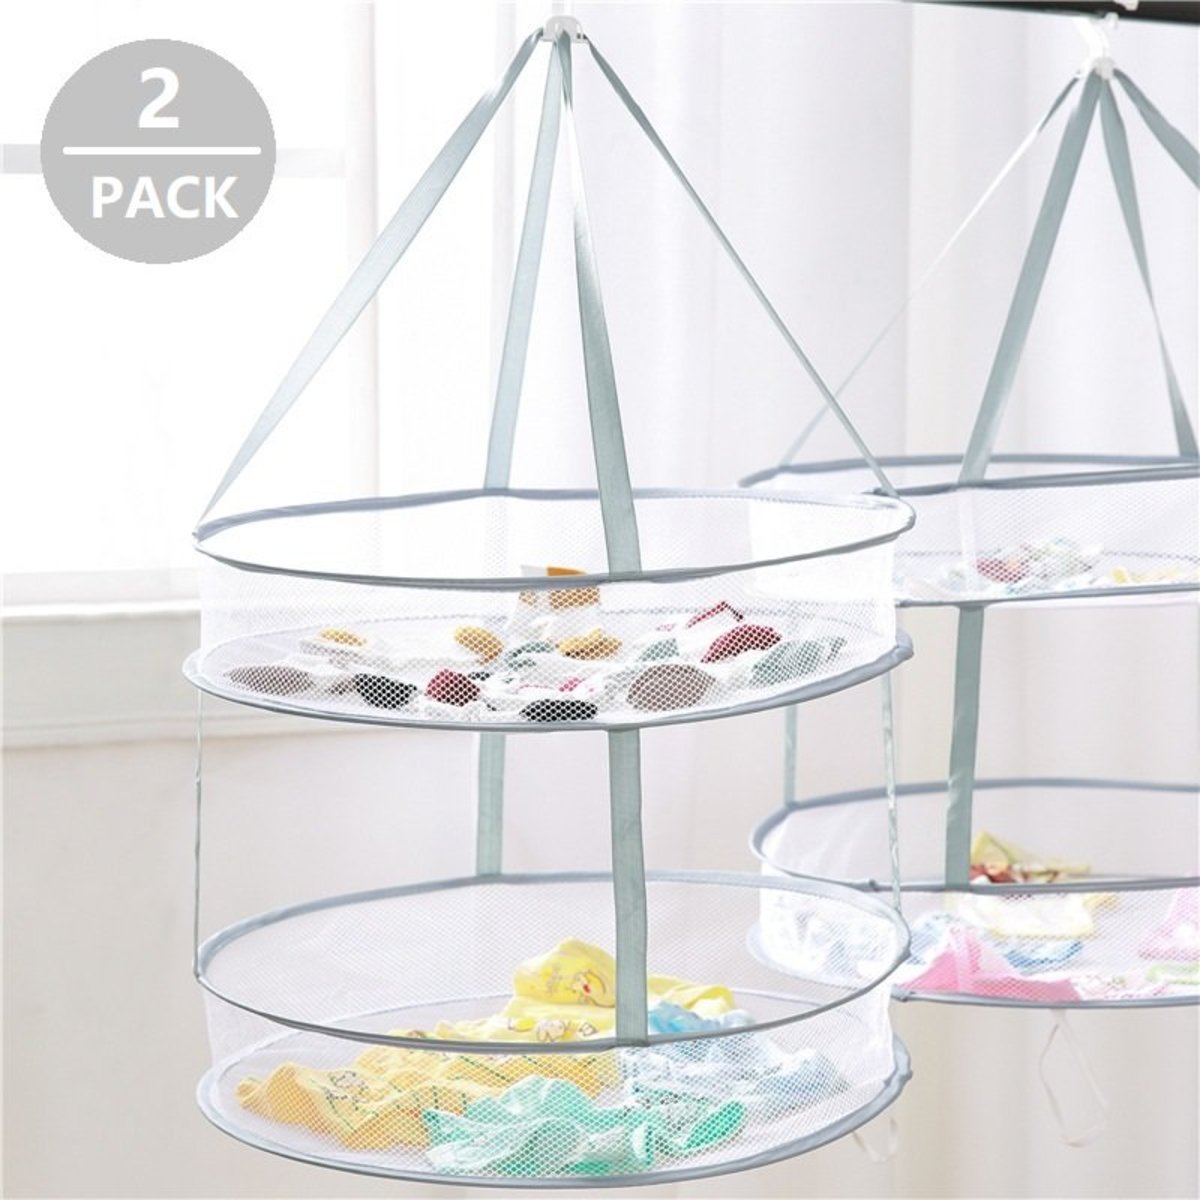 Home Hanging Clothes Laundry Basket Dryer Net Mesh Toys Drying Rack Folding Dace